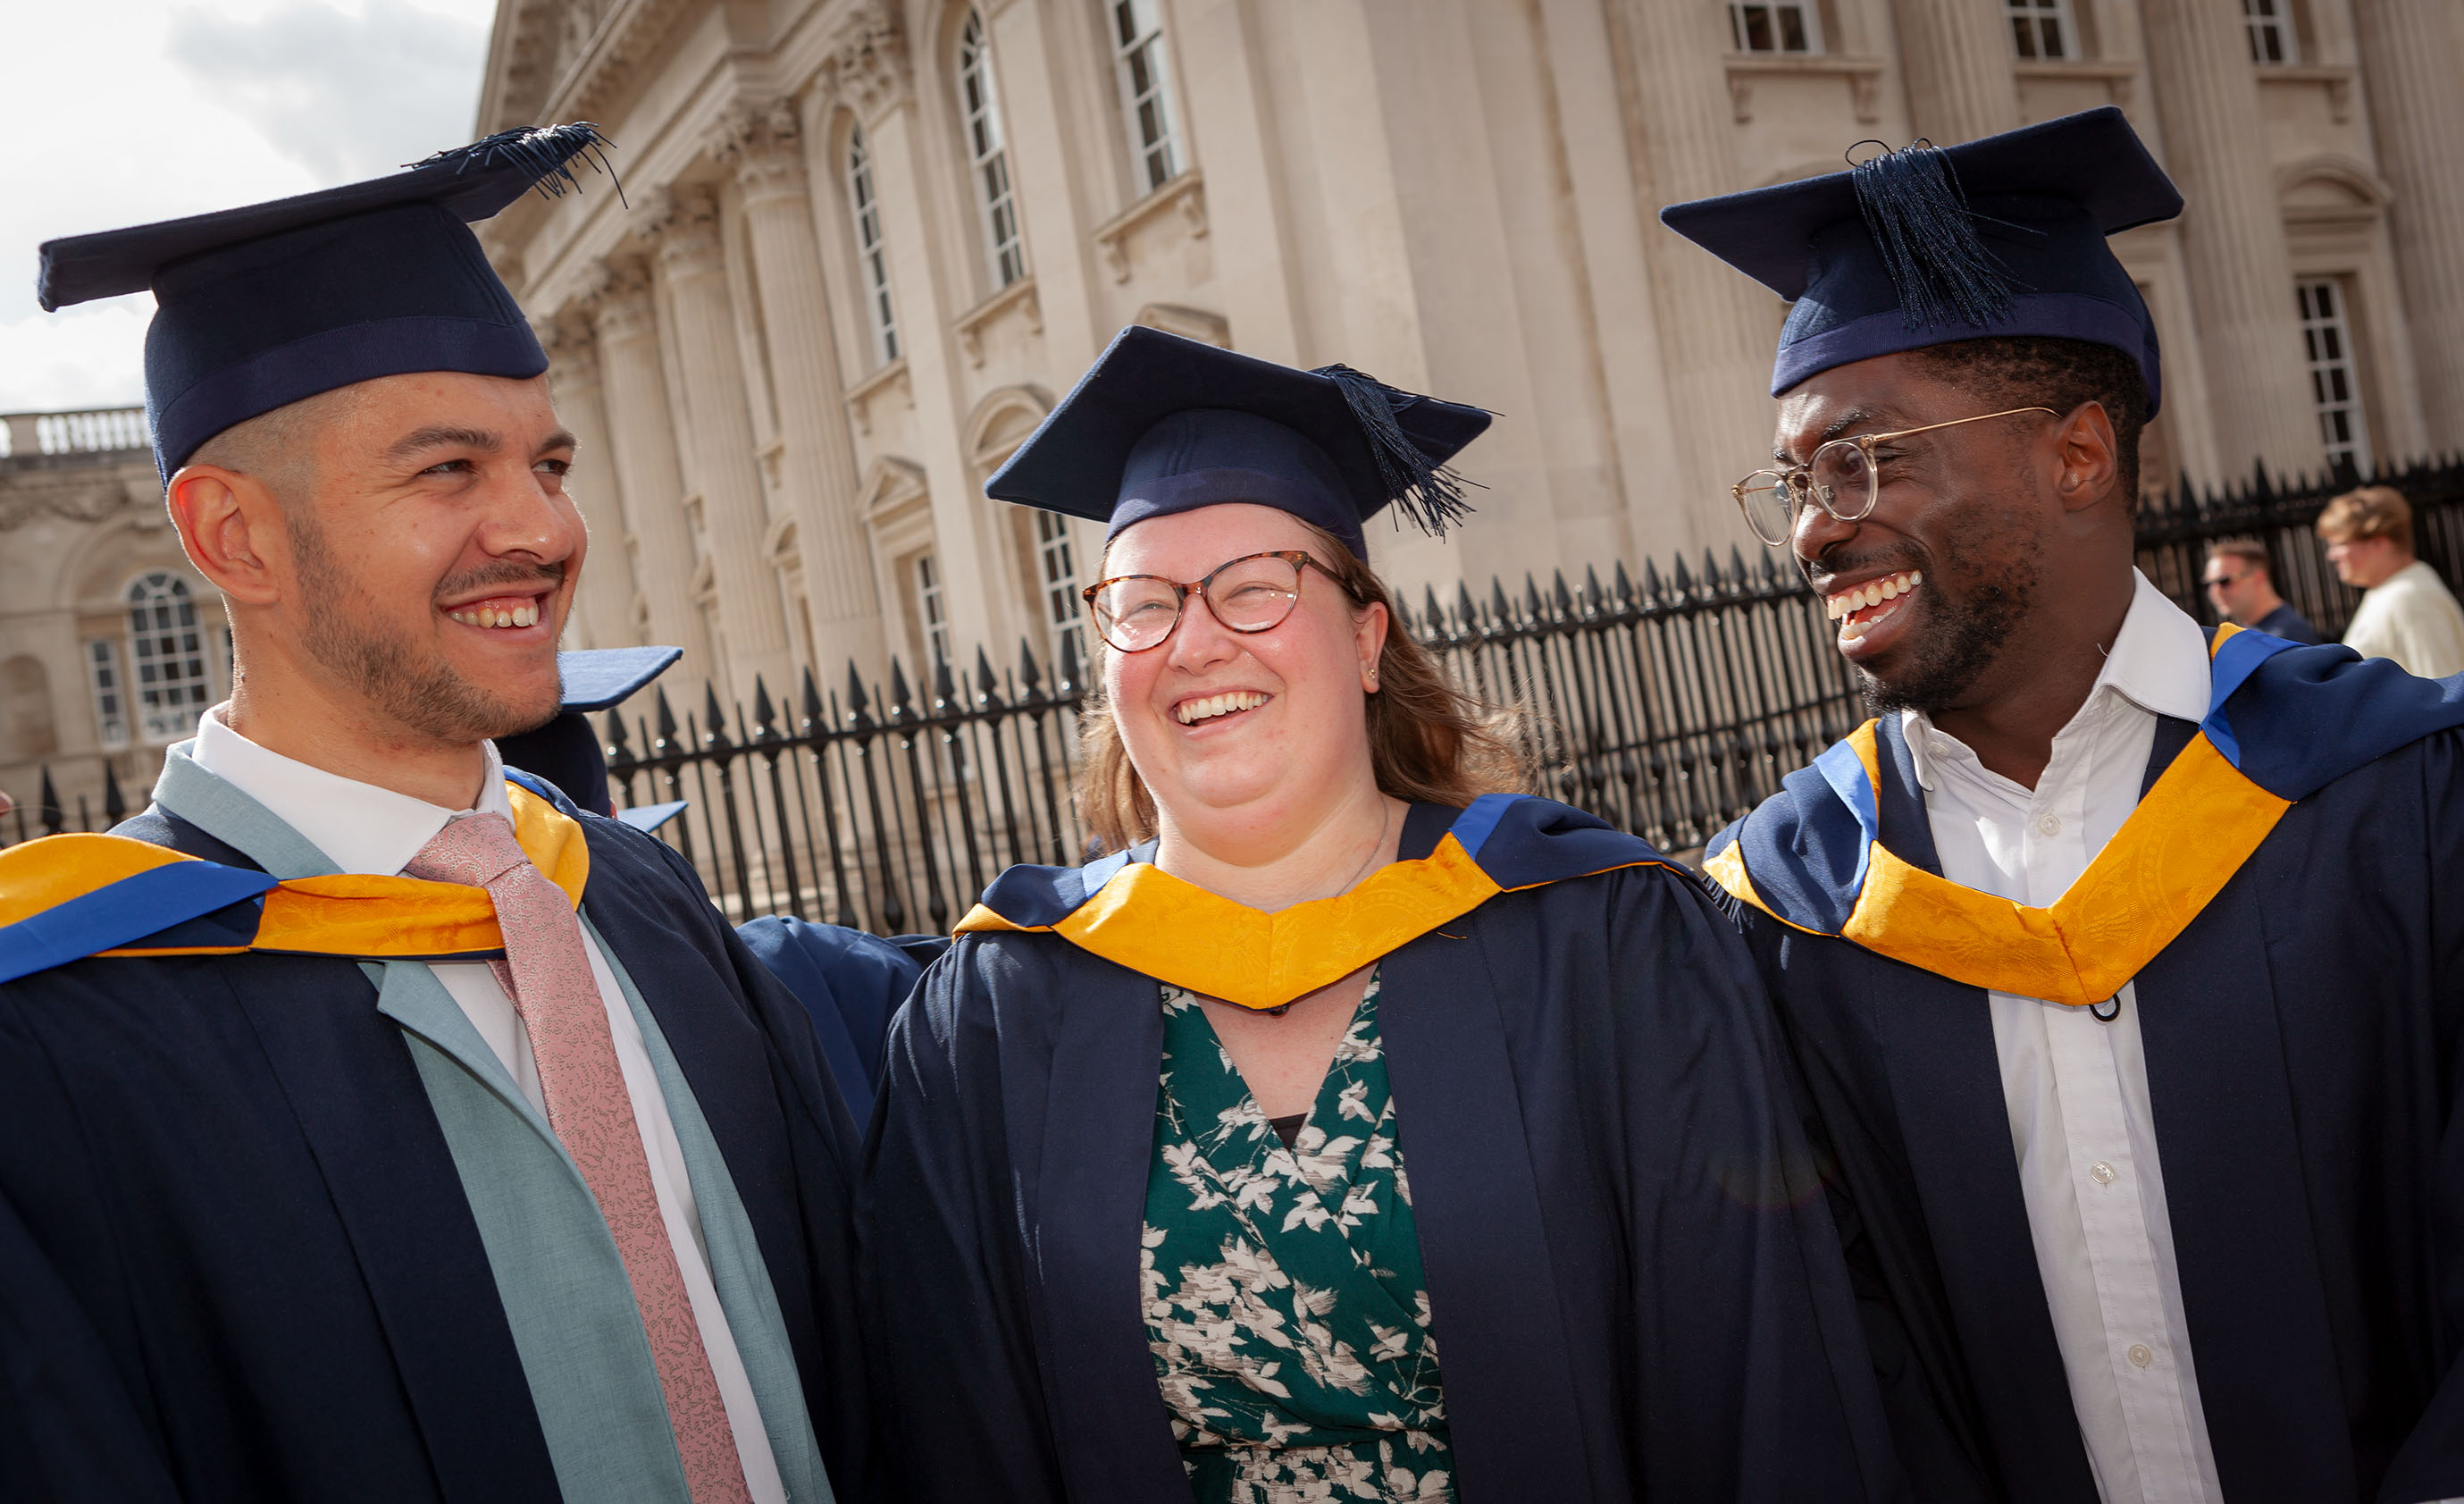 Data scientist apprentice graduates smile outside the graduation ceremony held at the Cambridge Corn Exchange dressed in navy and yellow cap and gowns.